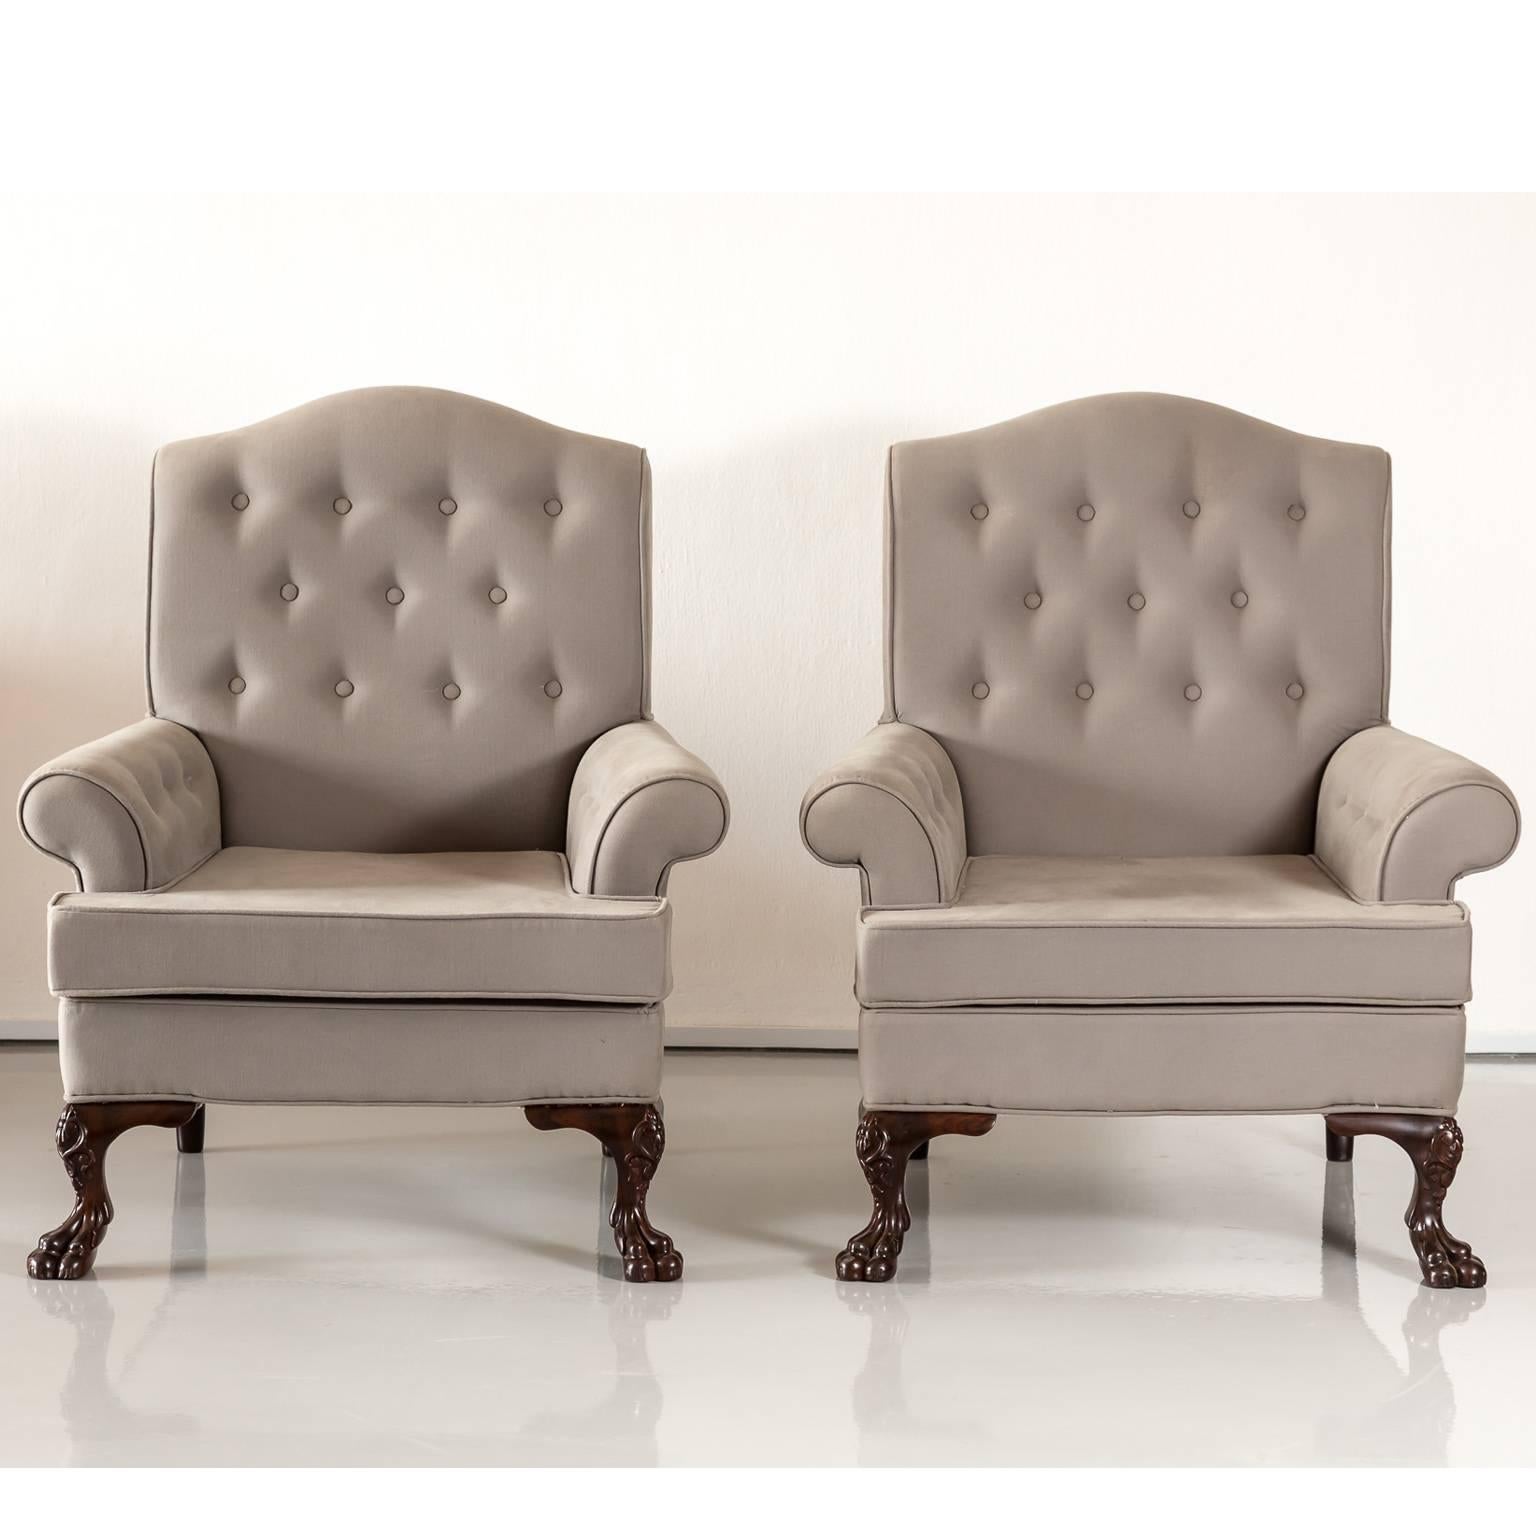 A comfortable pair of British Colonial upholstered Chesterfield style club-chairs. The broad roll of the arms slightly curve out, the back with a serpentine form of the top. The chairs which have a rosewood frame stand on carved cabriole legs ending